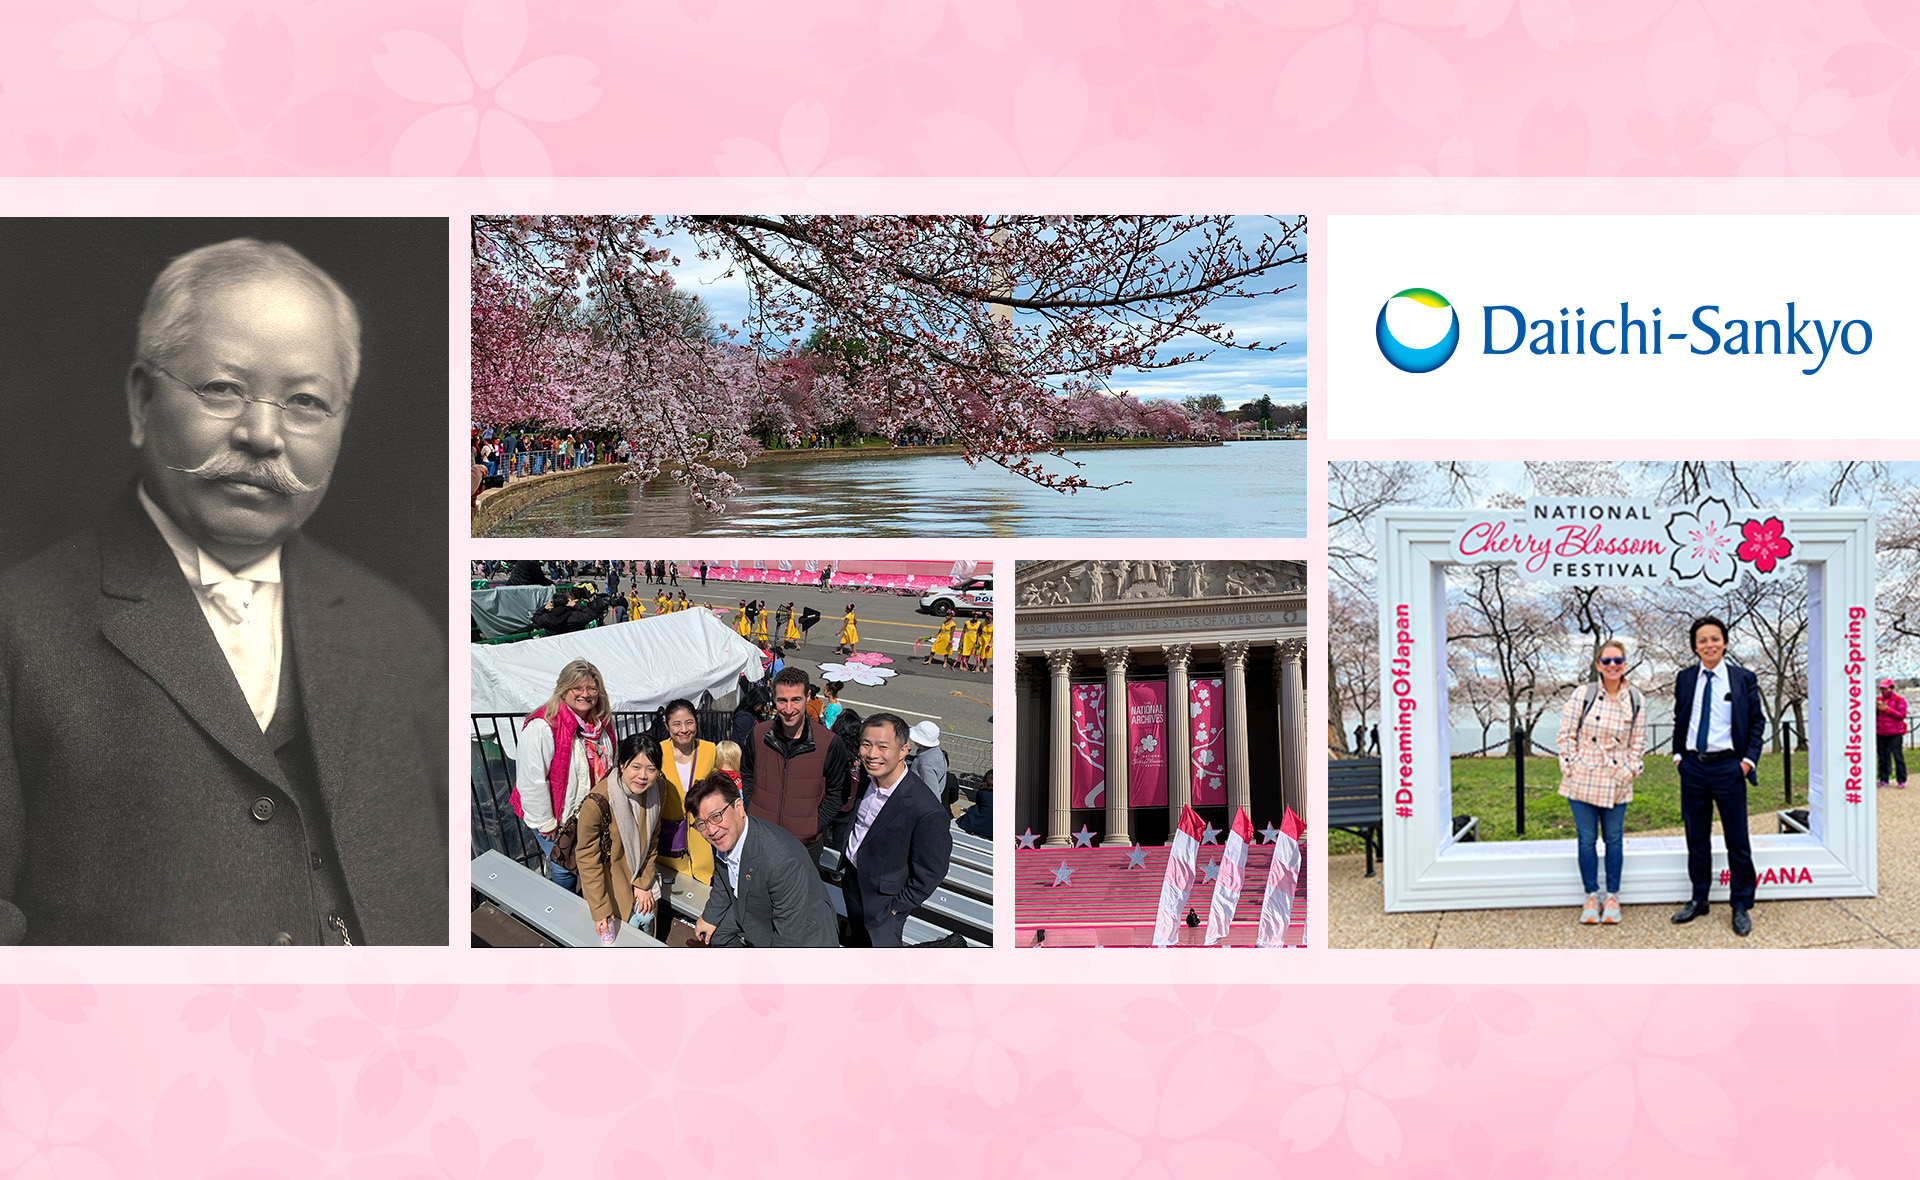 photo collage: Dr. Takamine, cherry trees in bloom, National Archives decorated for NCBF parade, groups of people outdoors